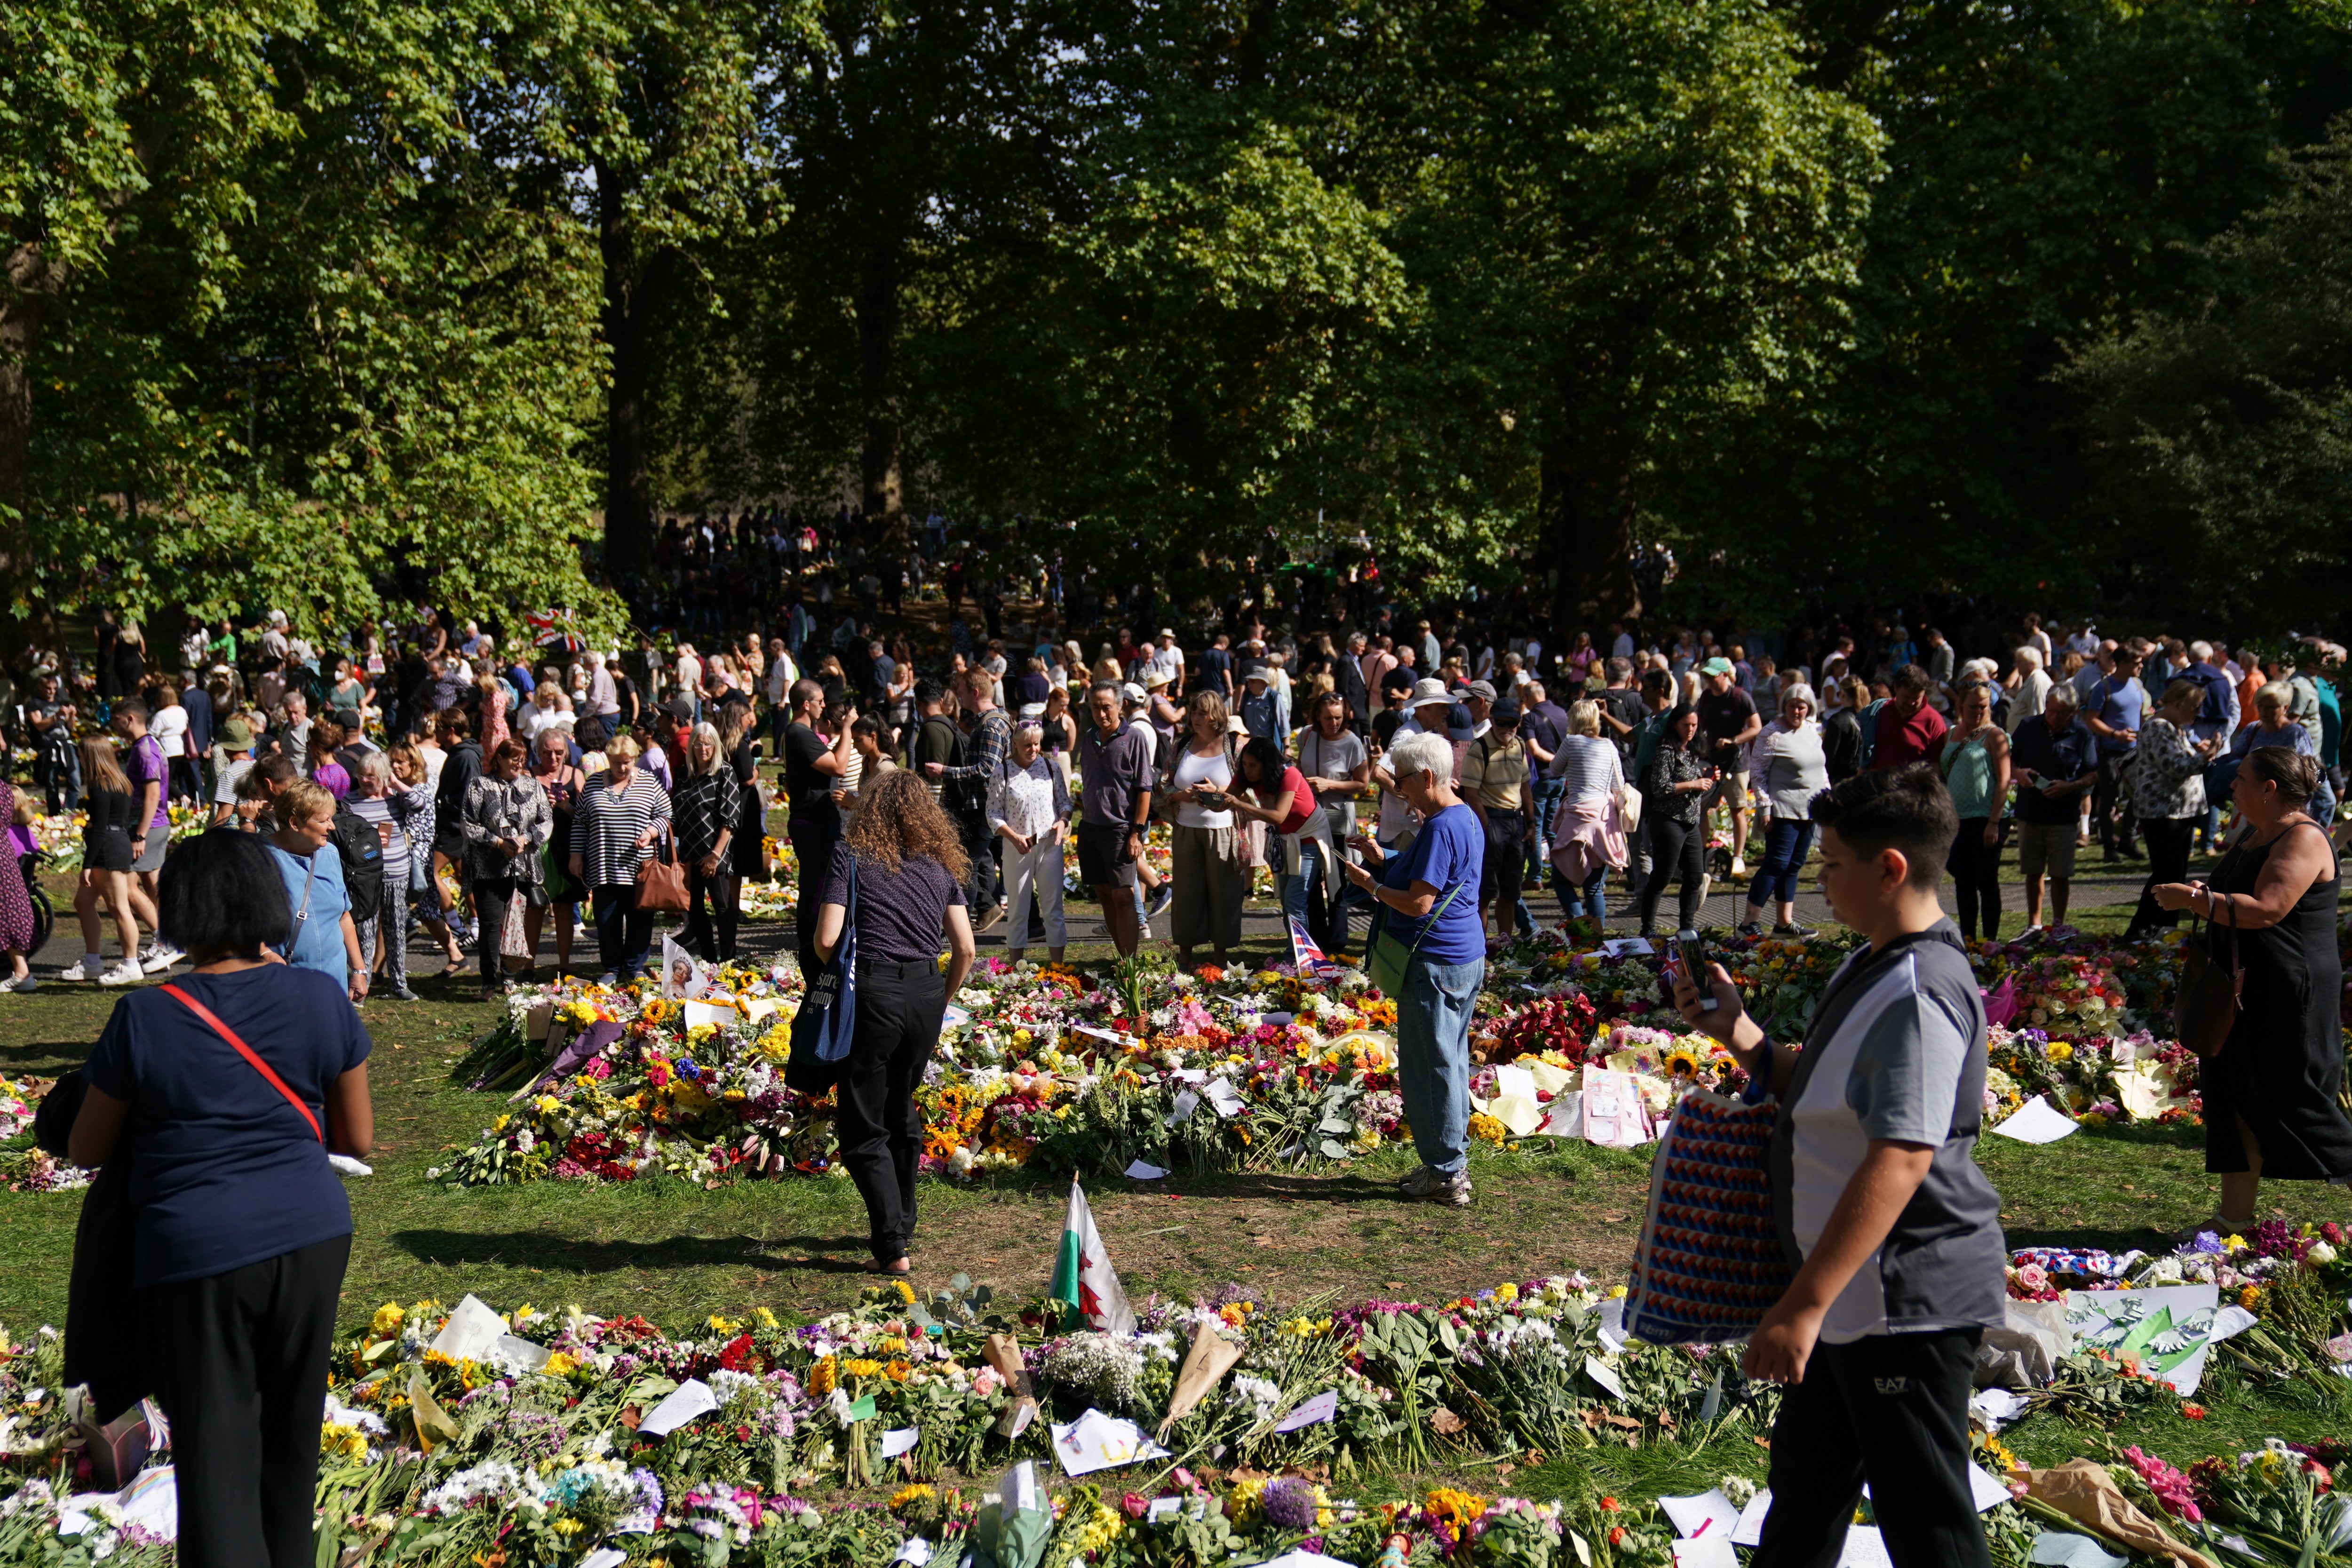 Members of the public view floral tributes in Green Park, near Buckingham Palace